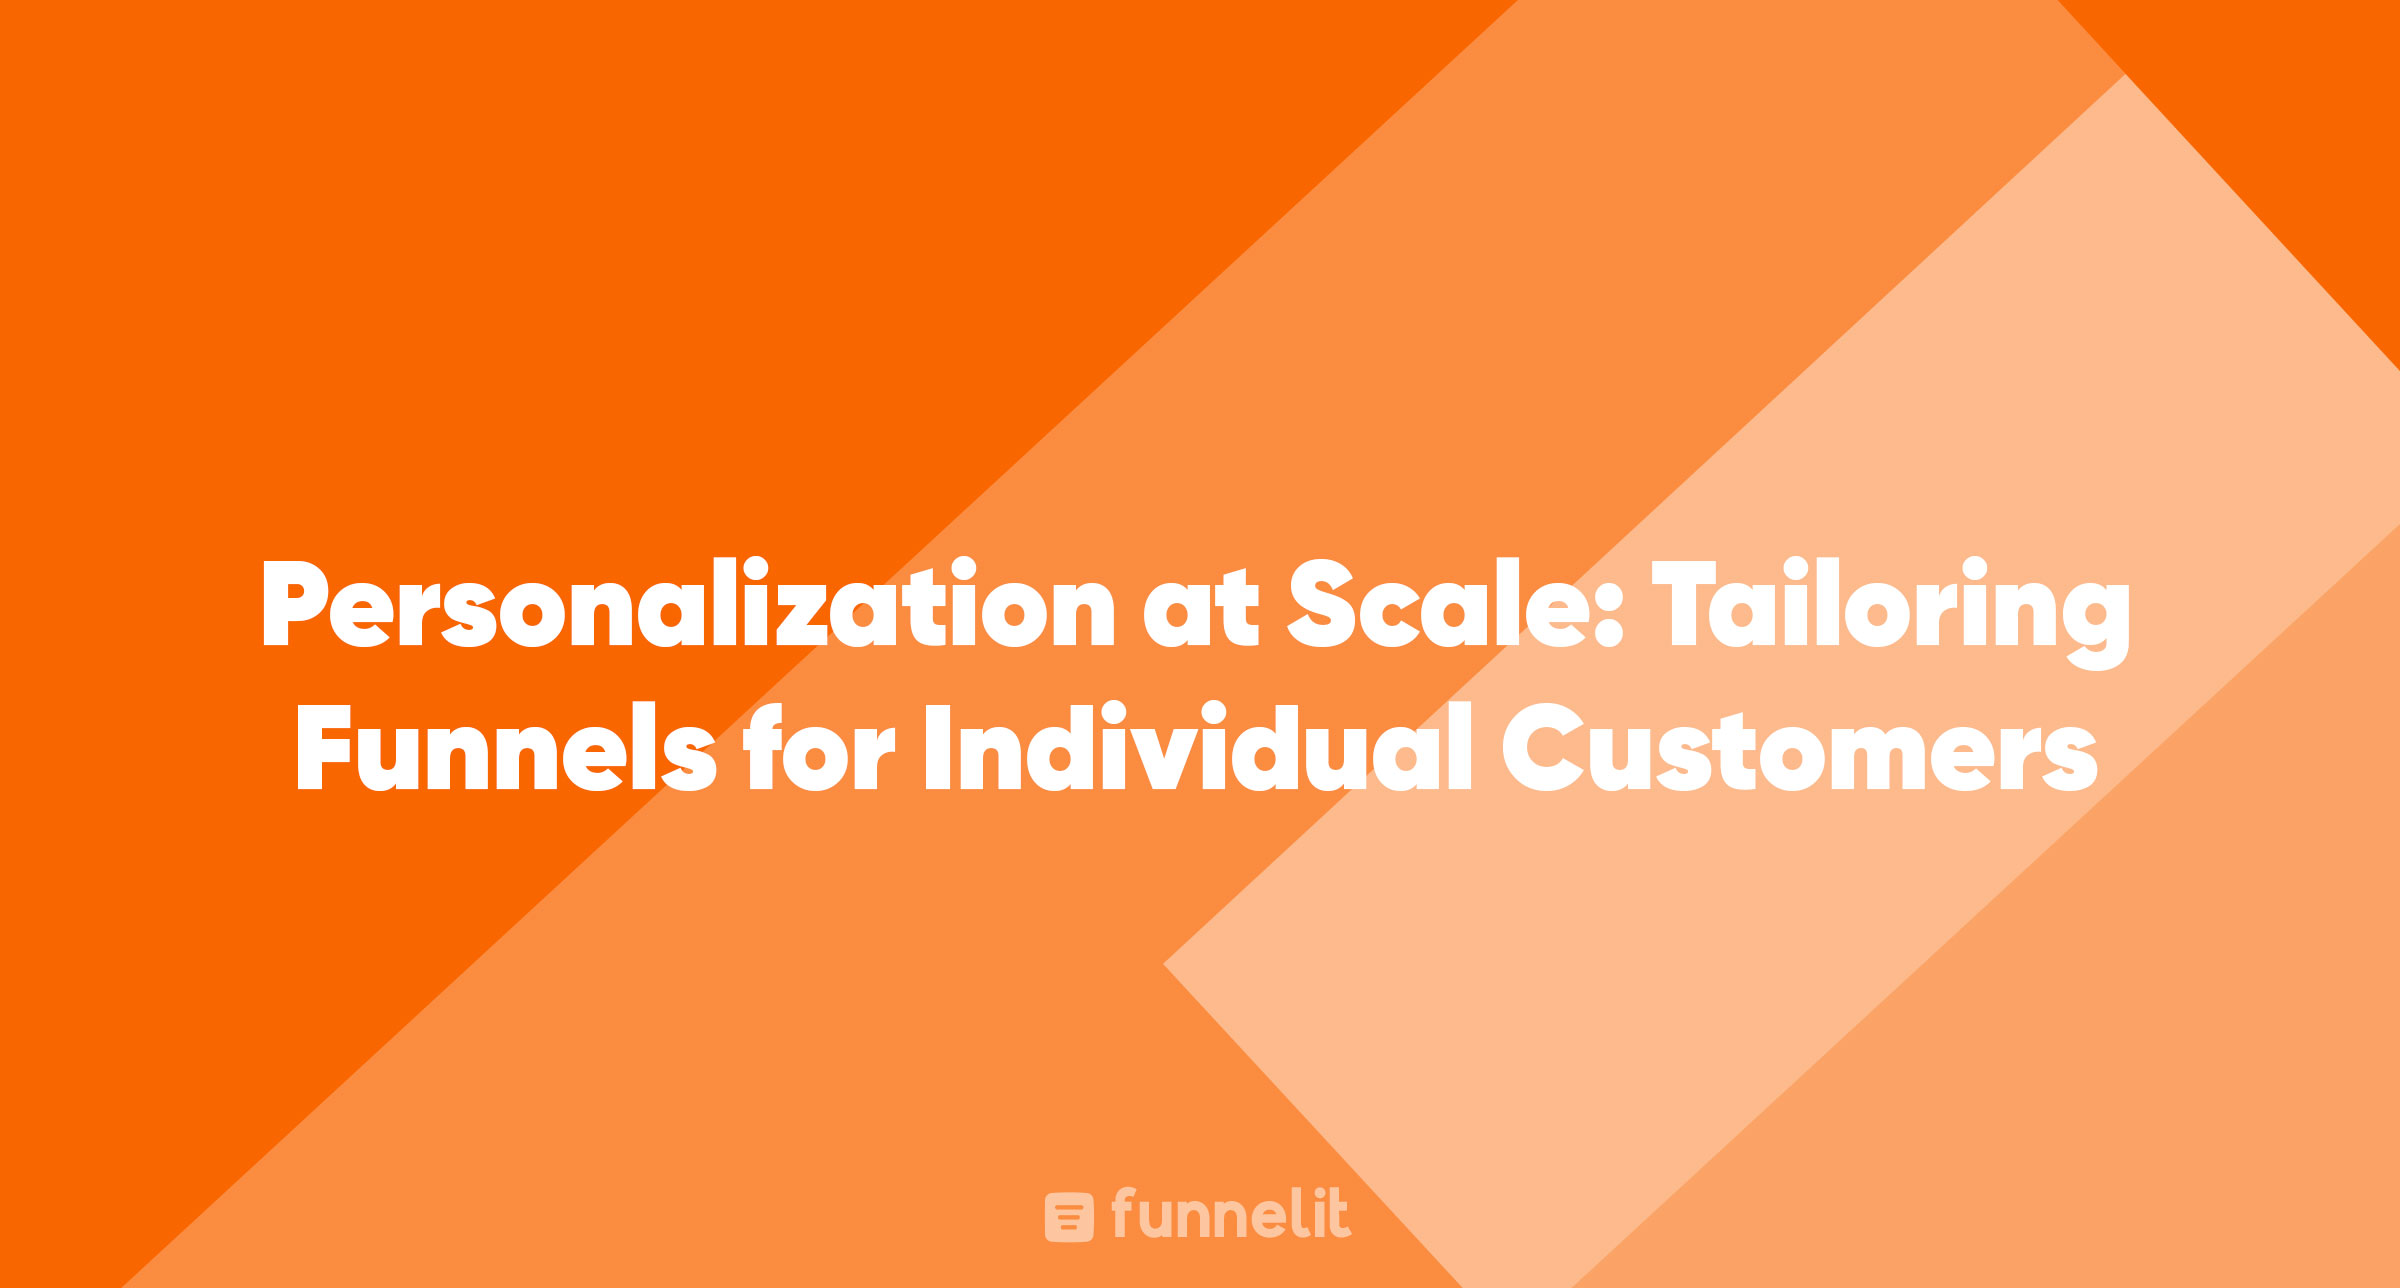 Article | Personalization at Scale: Tailoring Funnels for Individual Customers